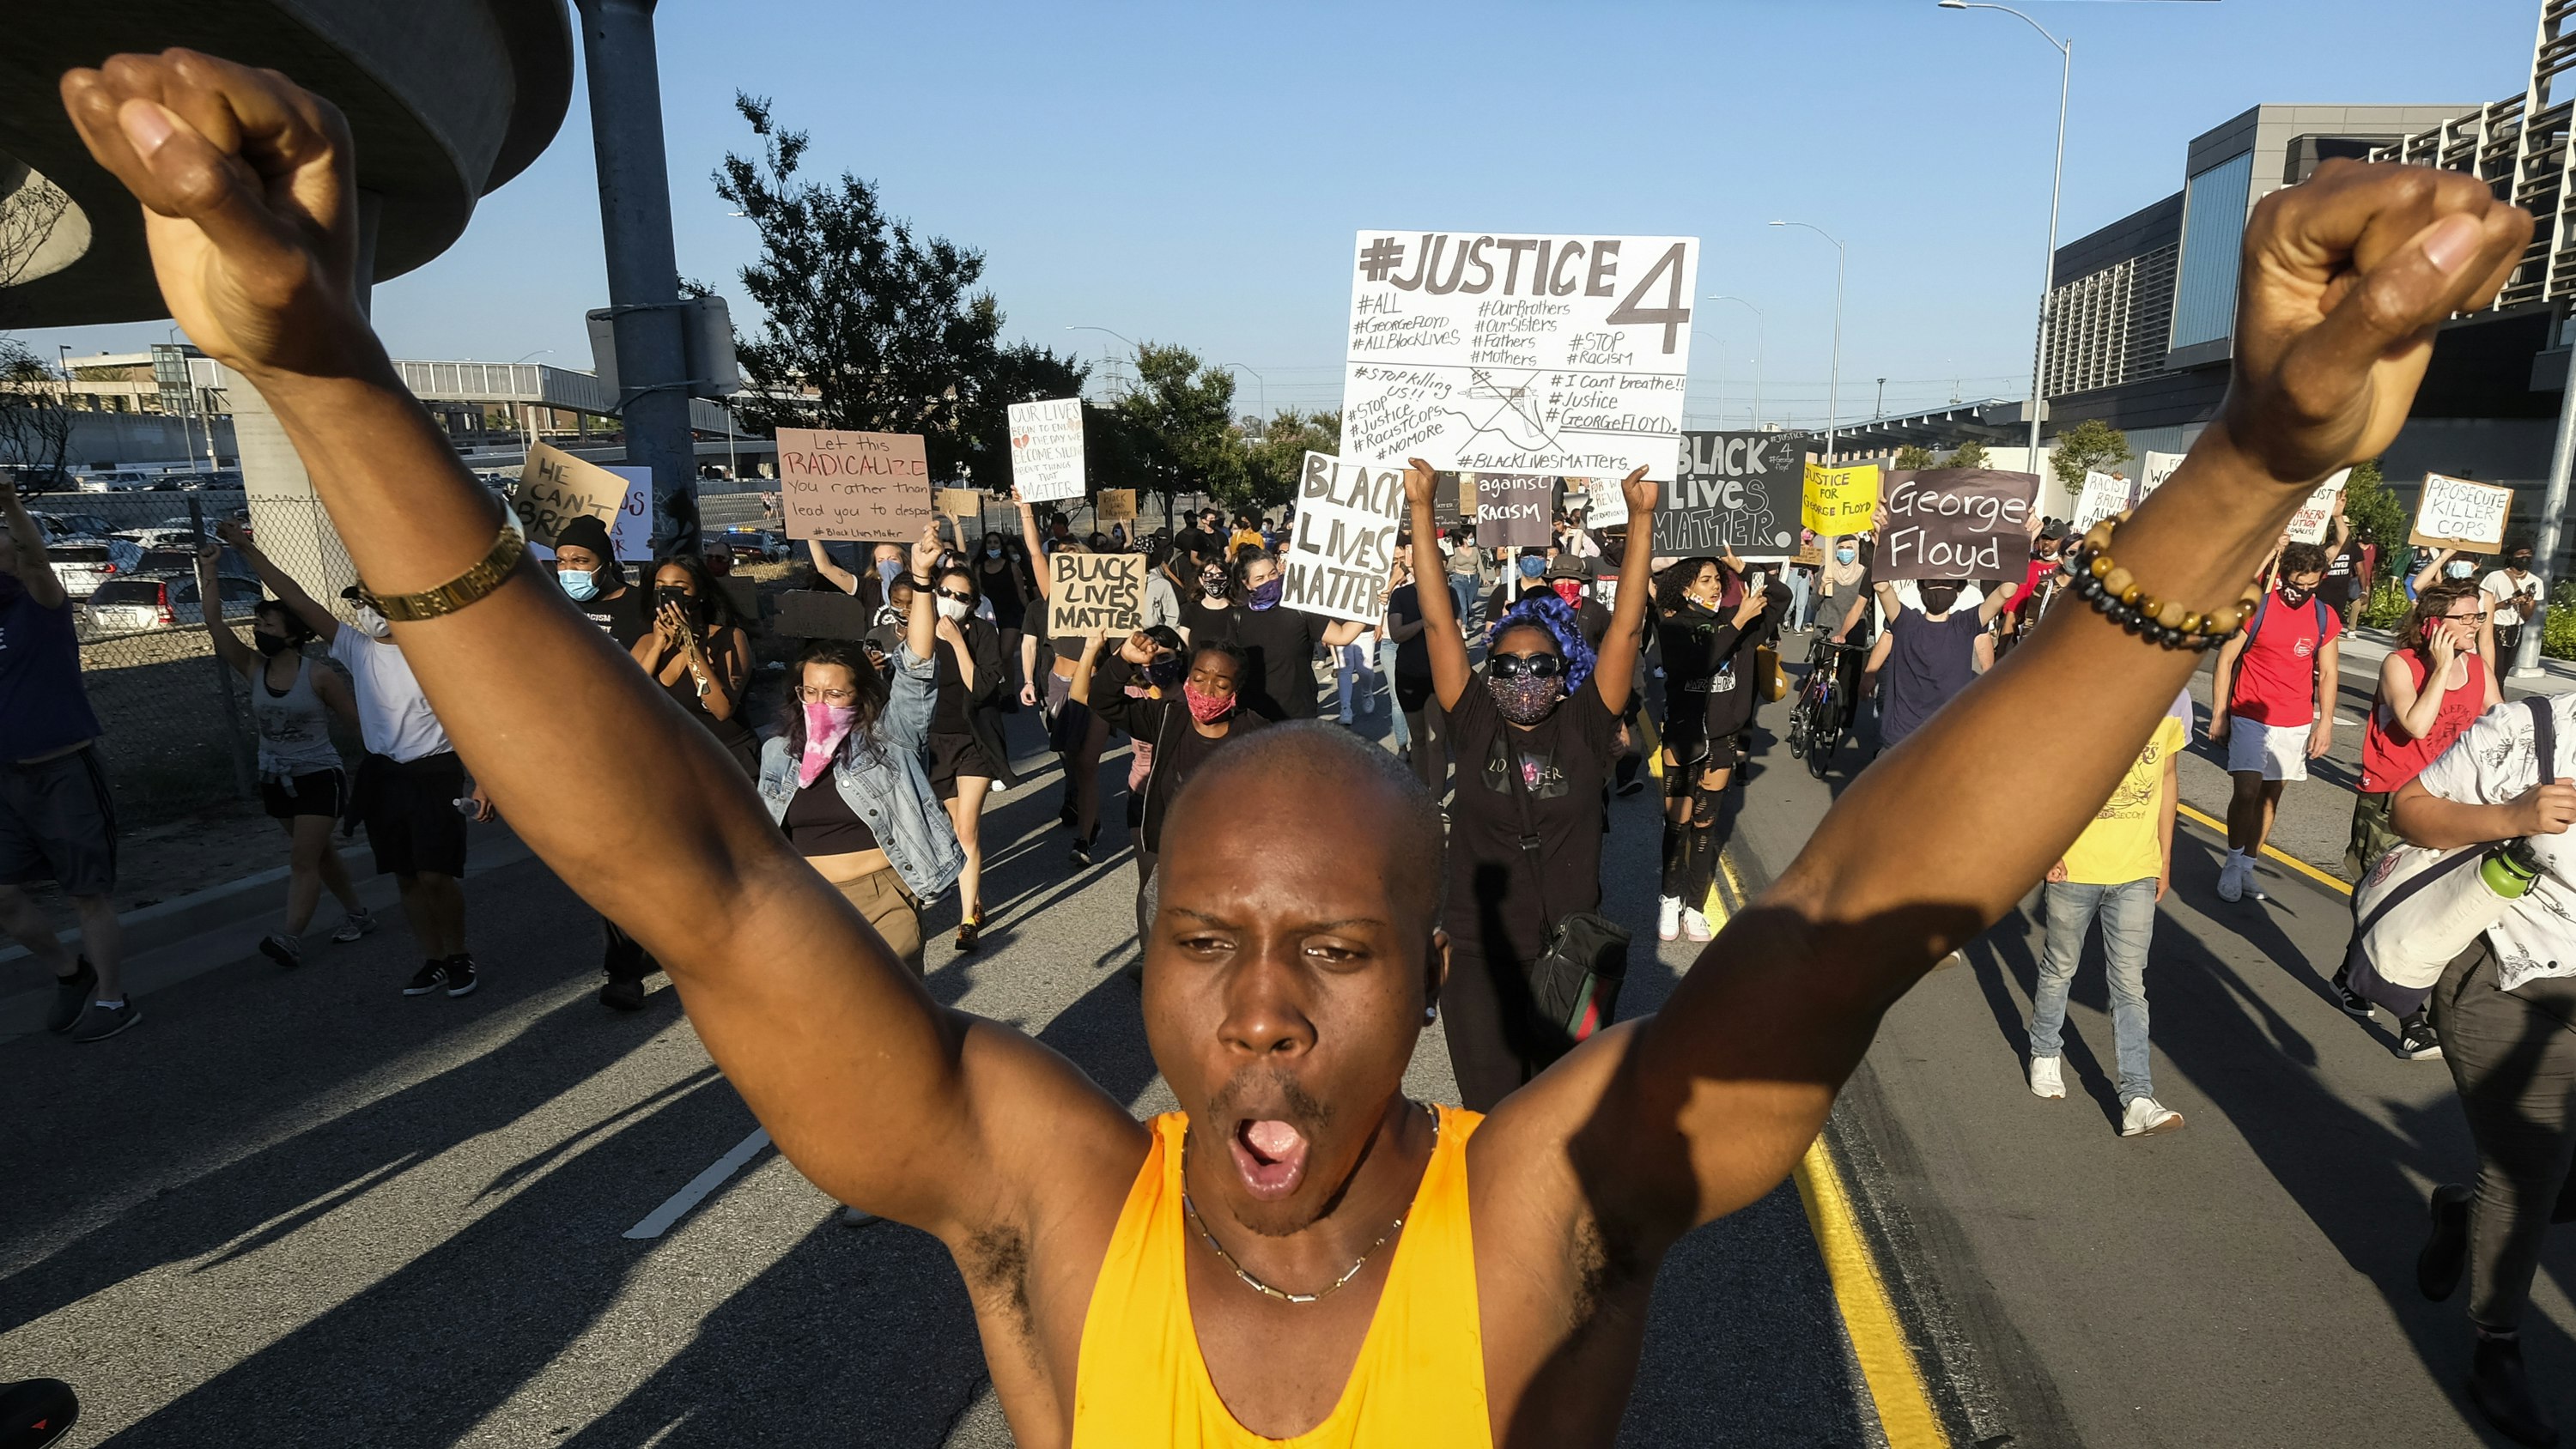 Demonstrators marched in Los Angeles following the police killing of George Floyd in Minneapolis. AP Photo/Ringo H.W. Chiu